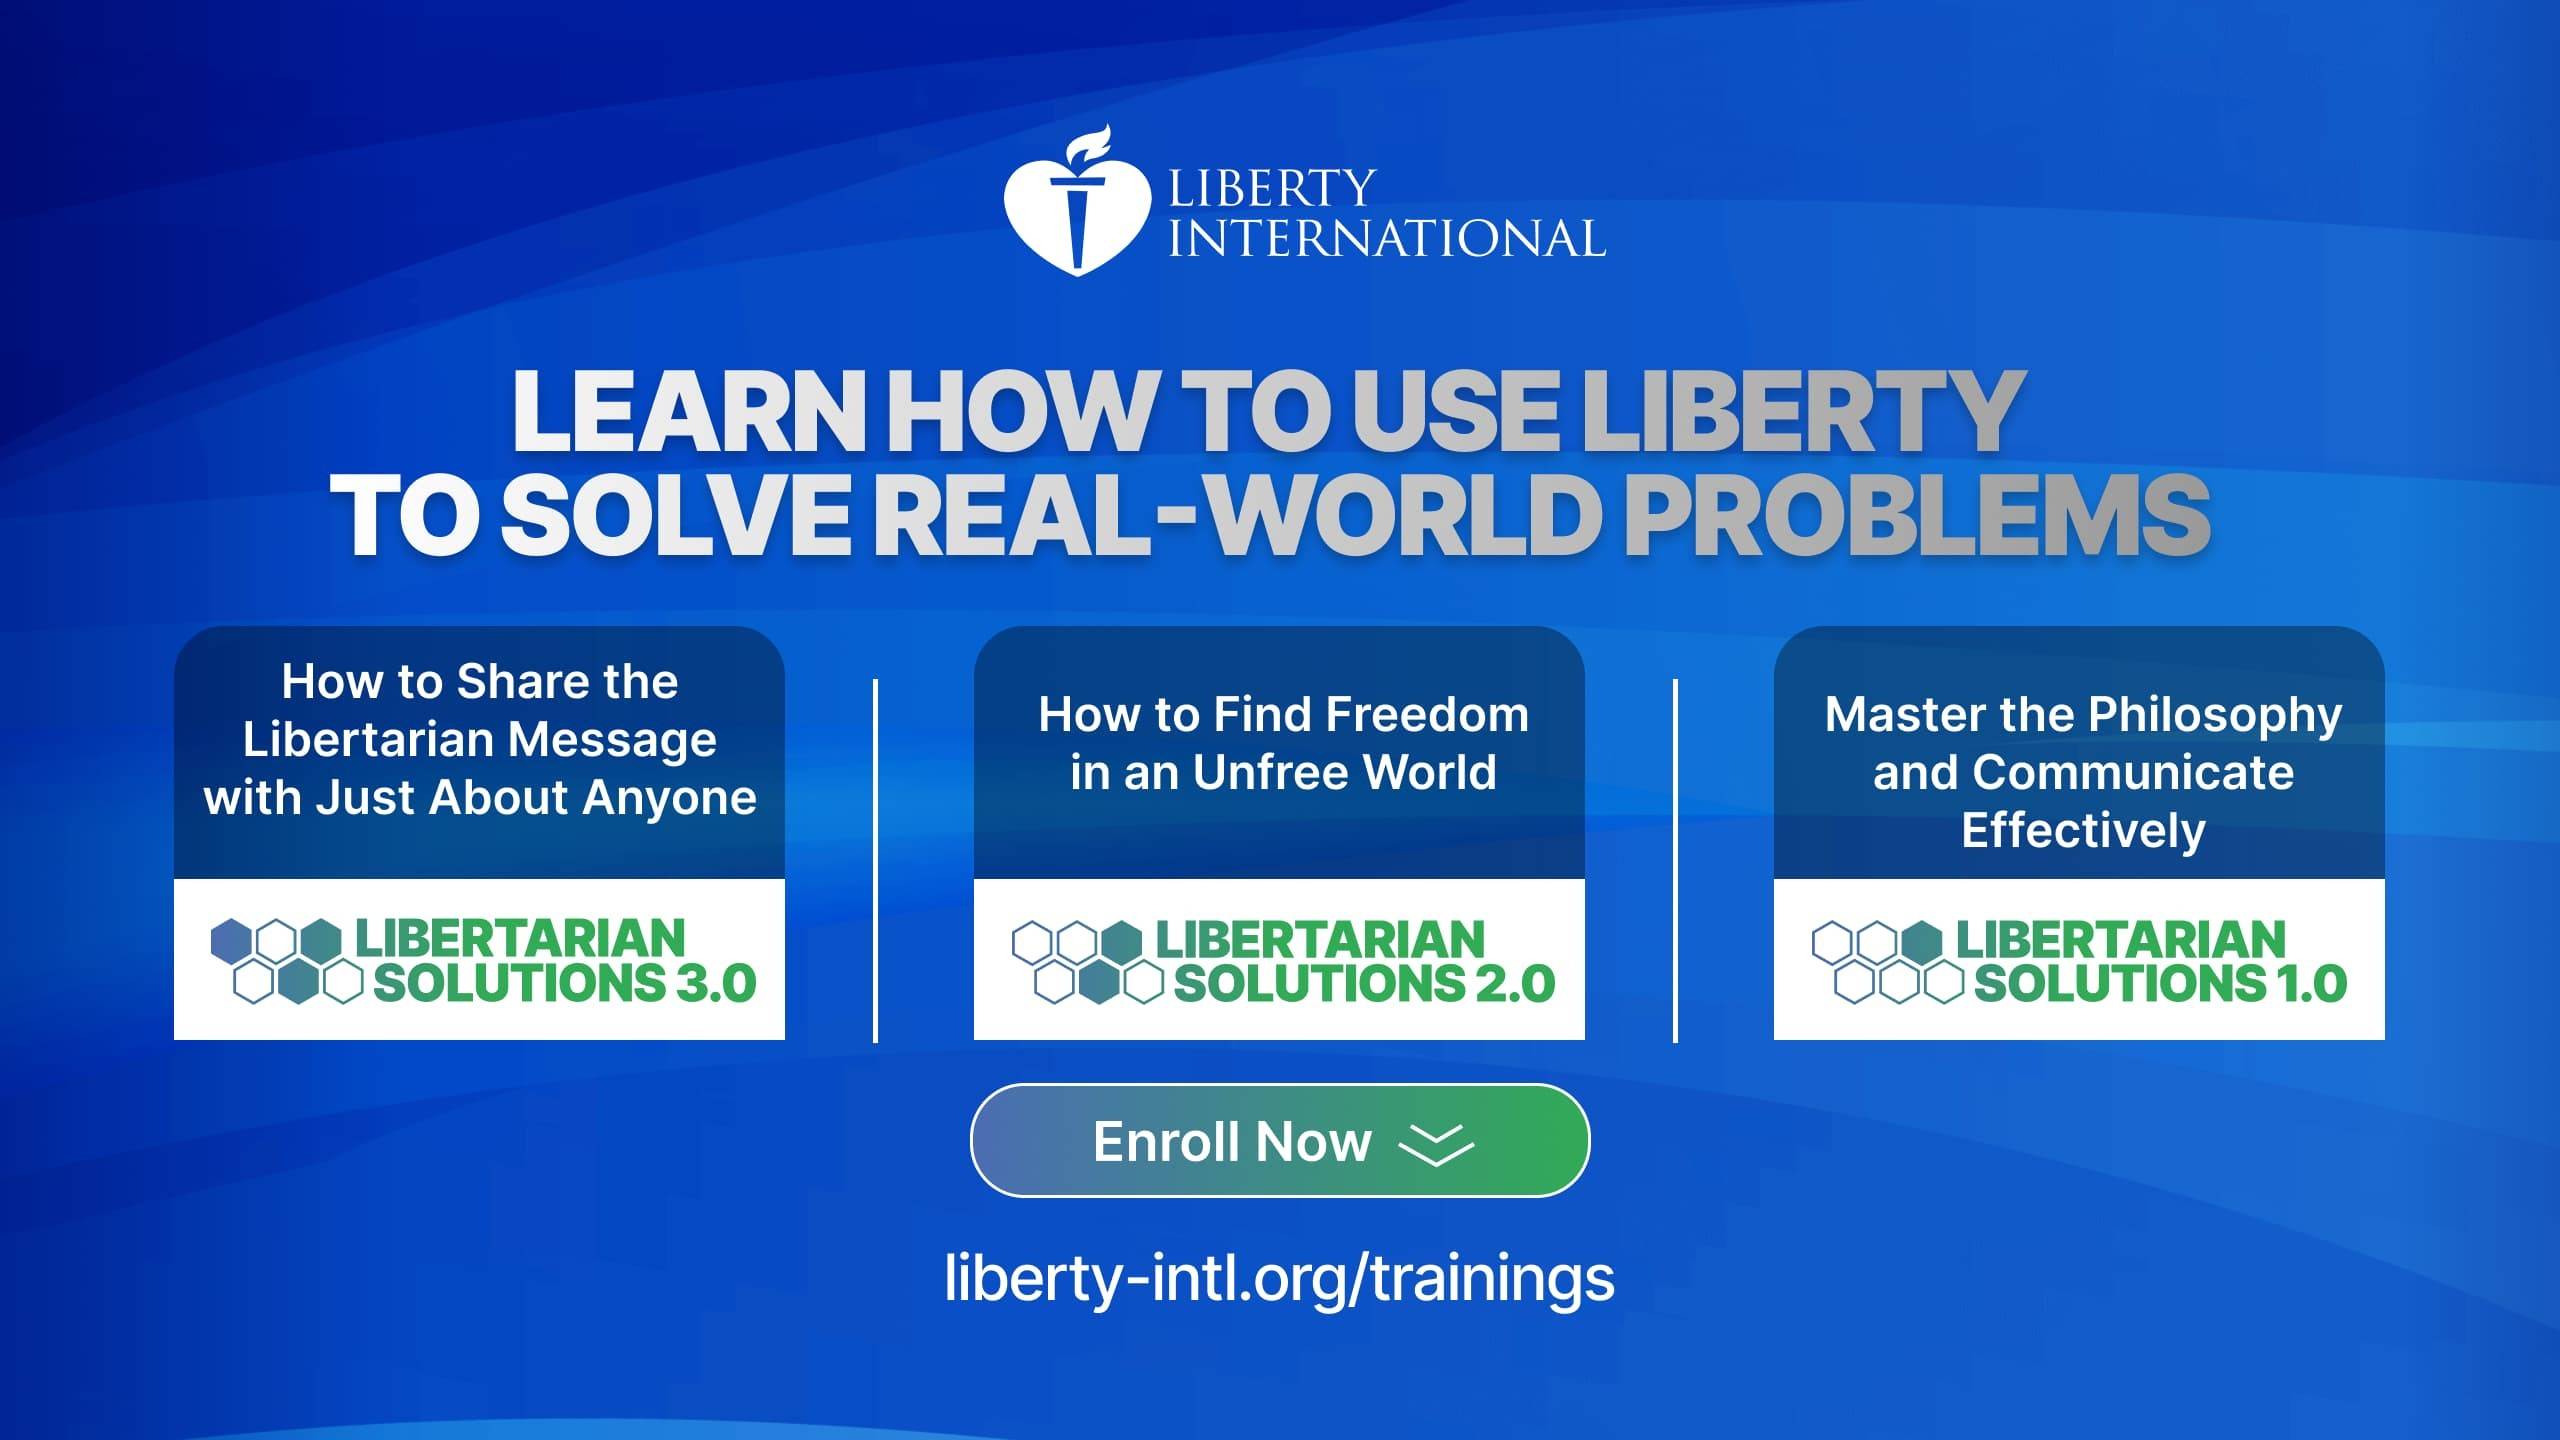 Liberty International Seeks to Empower Liberty Champions with “Libertarian Solutions” Lecture Series